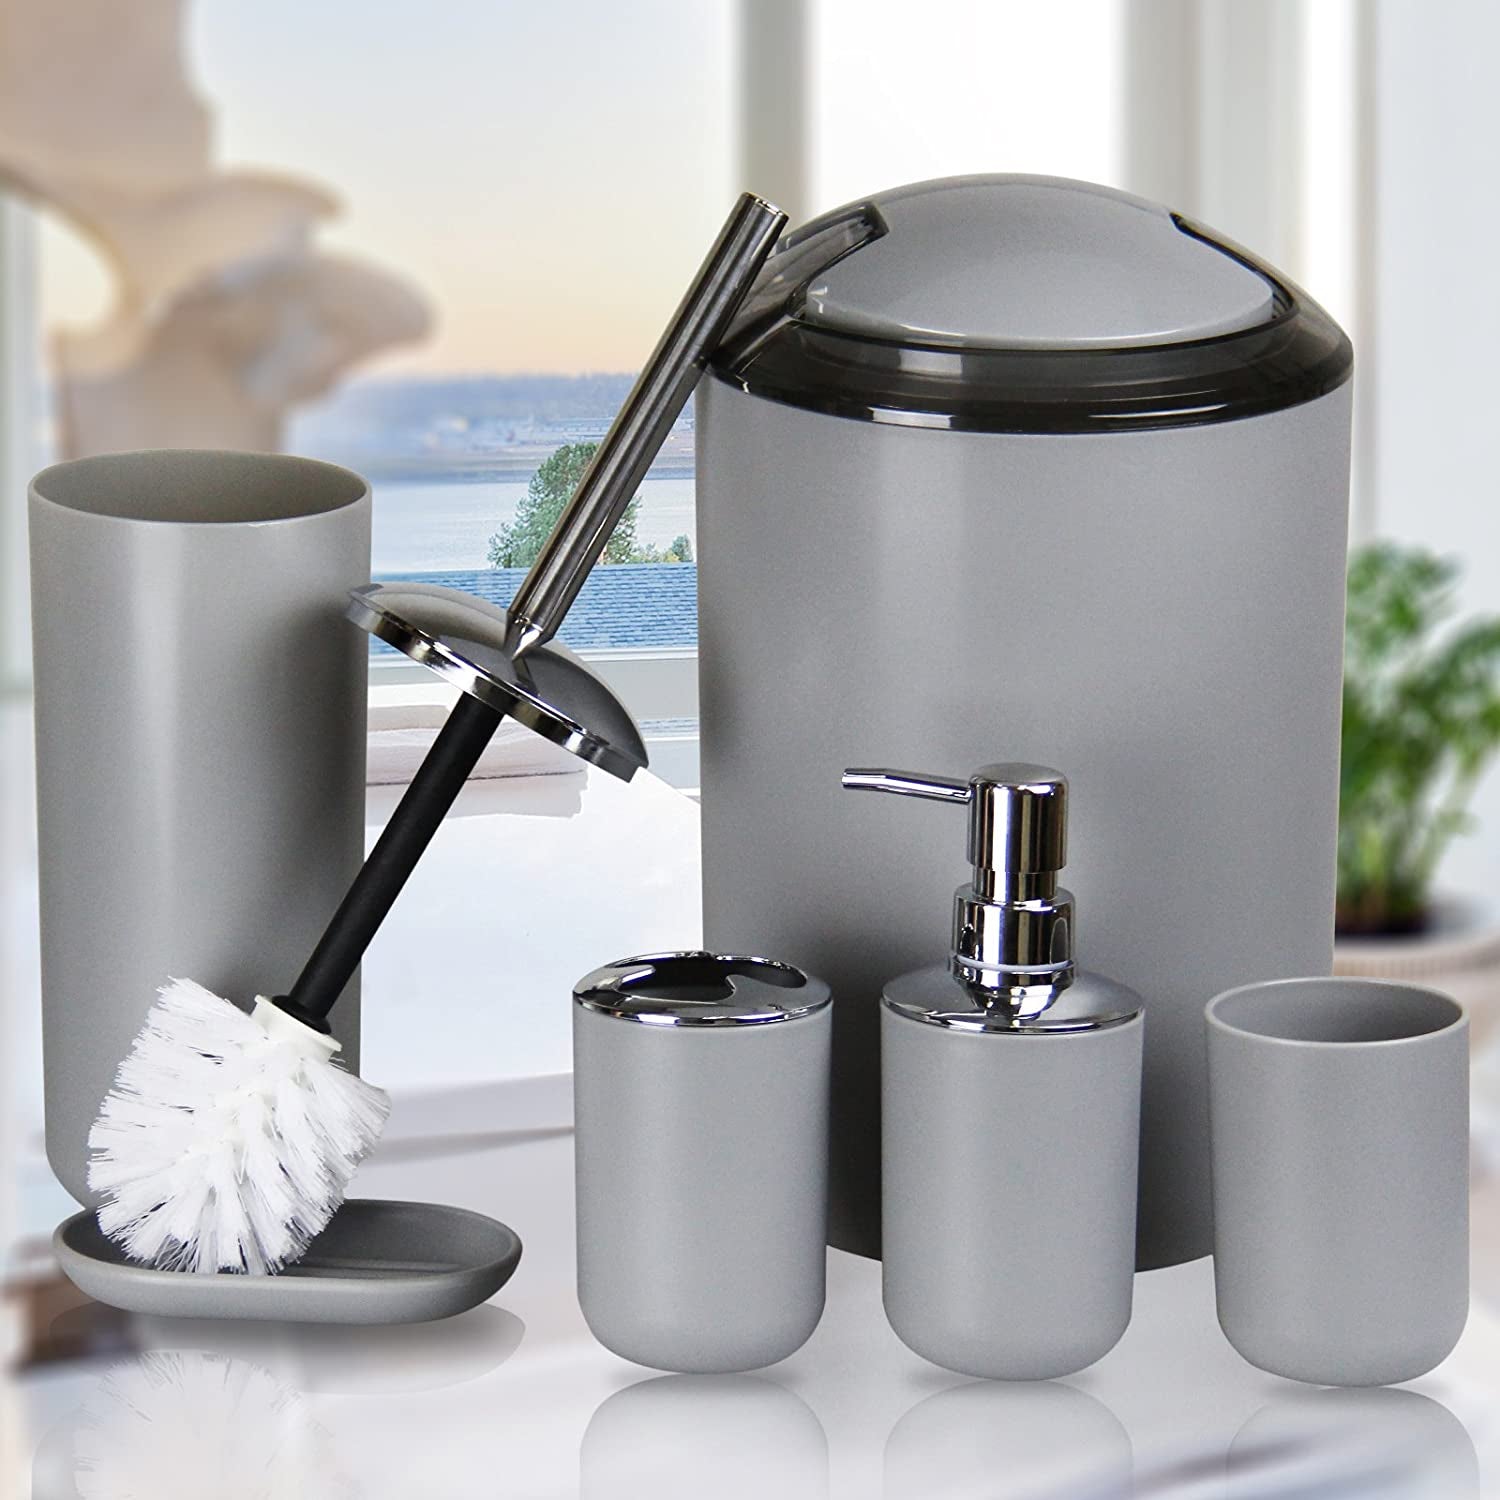 Bathroom Accessories Set, 6-Piece Plastic Gift Set, Toothbrush Holder, Toothbrush Cup, Soap Dispenser, Soap Dish, Toilet Brush Holder, Trash Can (Grey)